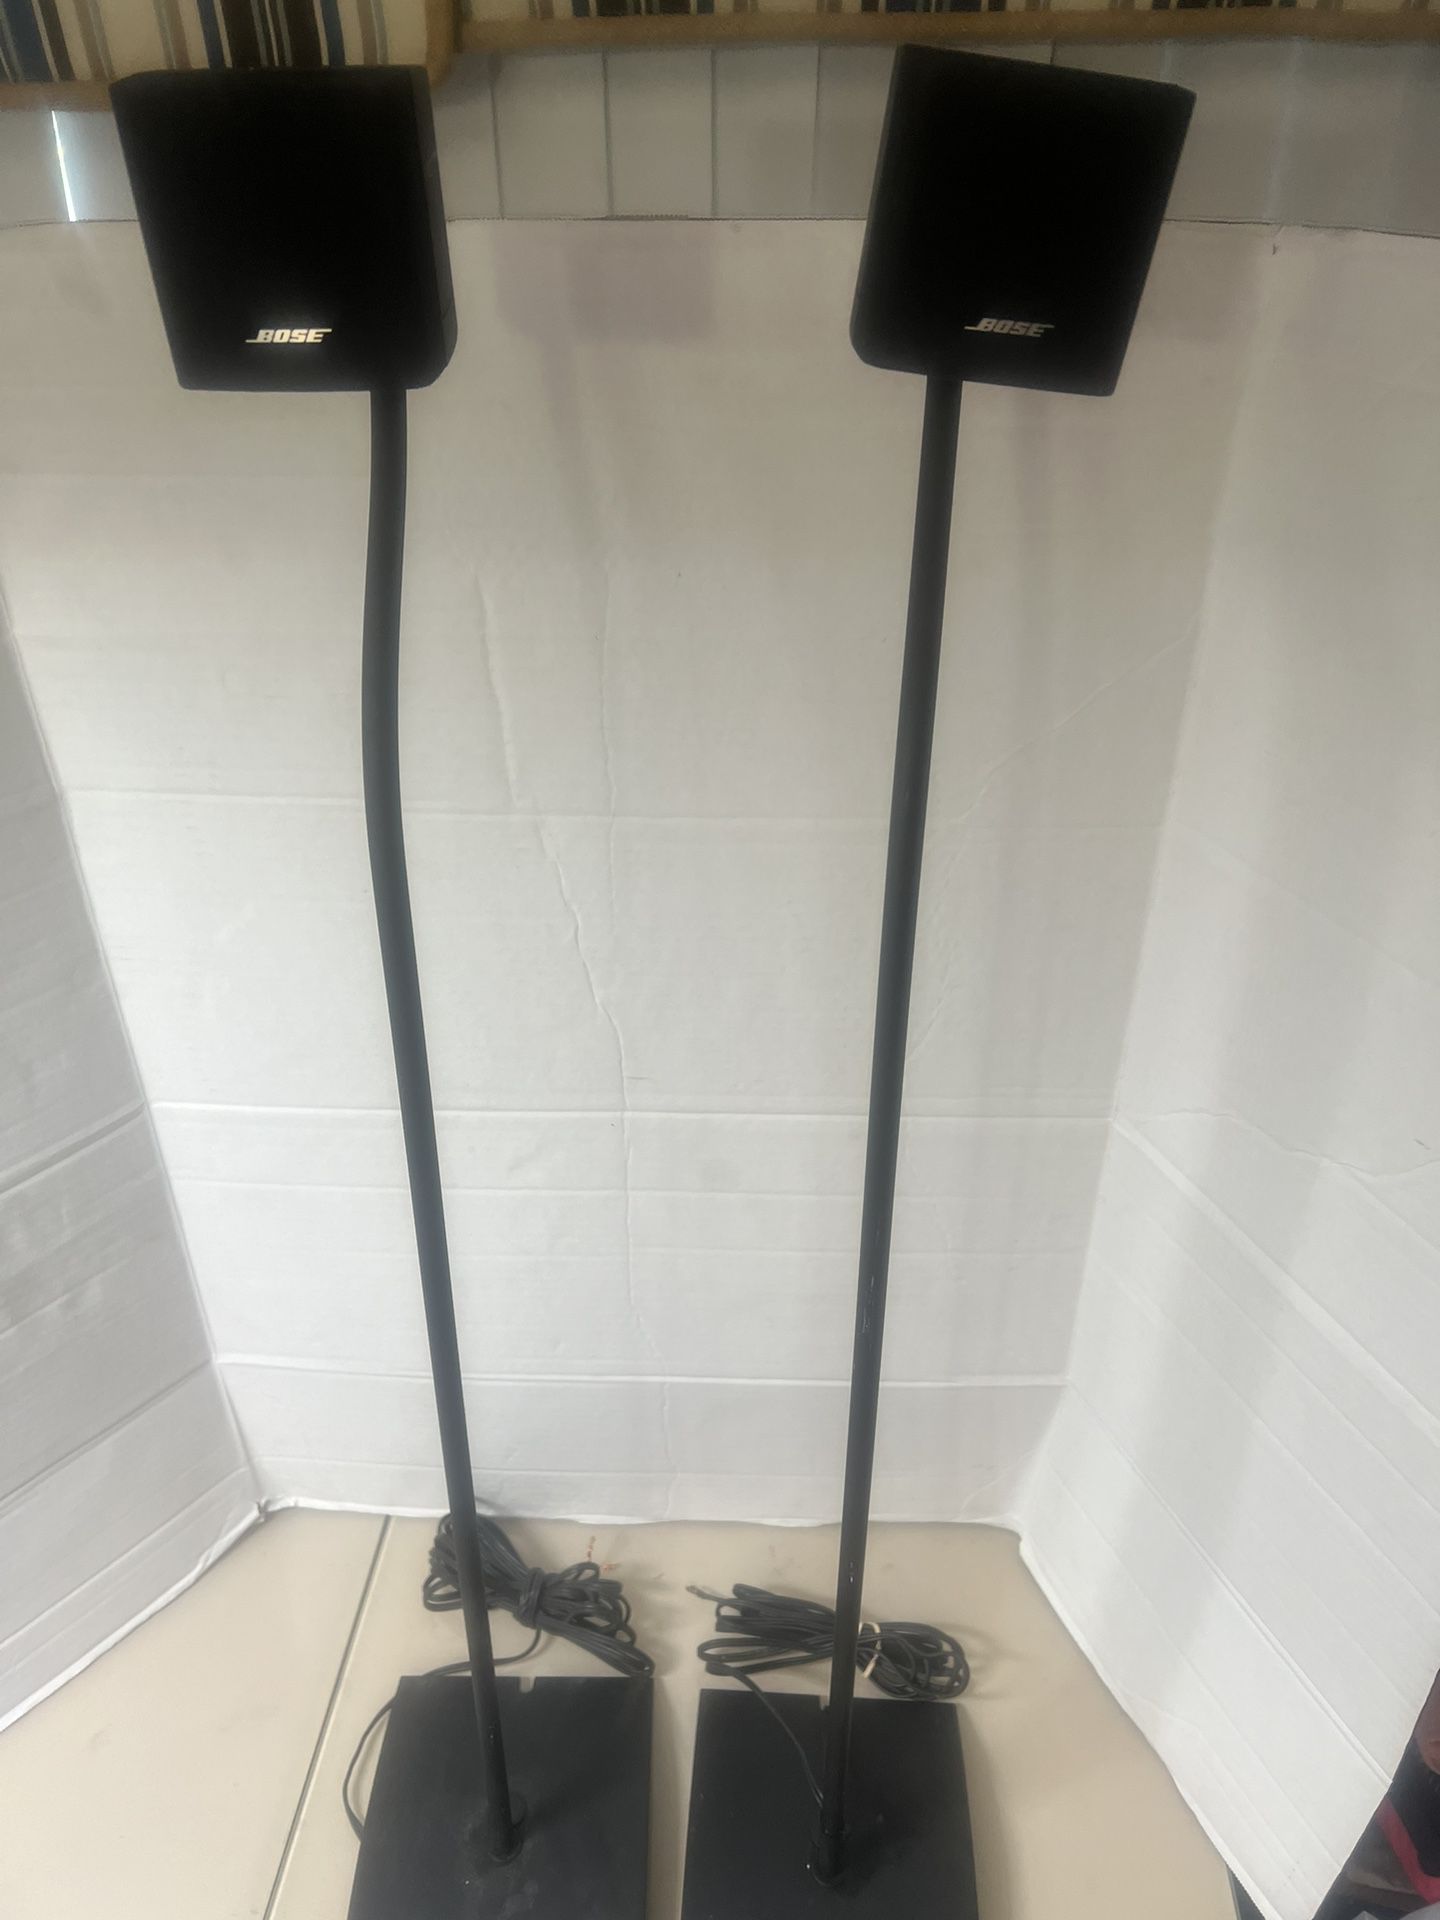 Bose Pair of Single Cubes Floor Speaker With Stands & wires Free Shipping! READ. Used in good cosmetic condition with normal signs of usage. Unit has 